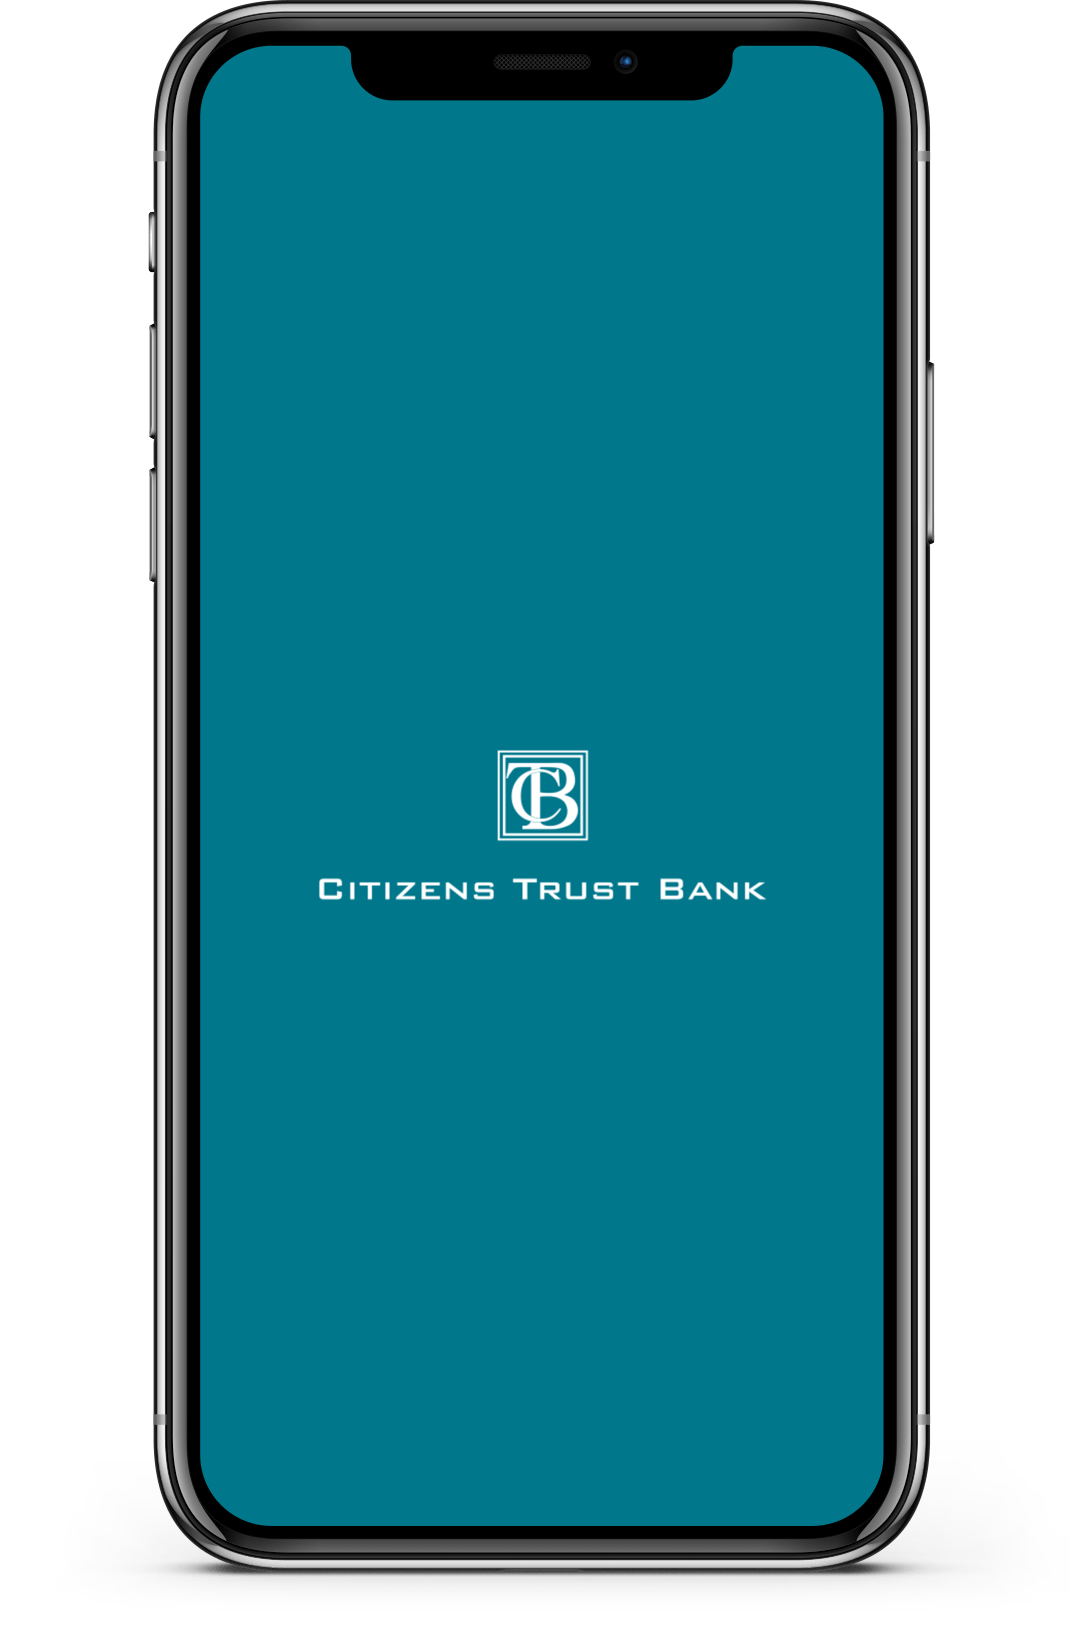 Online, Mobile and Digital Solutions - Citizens Trust Bank